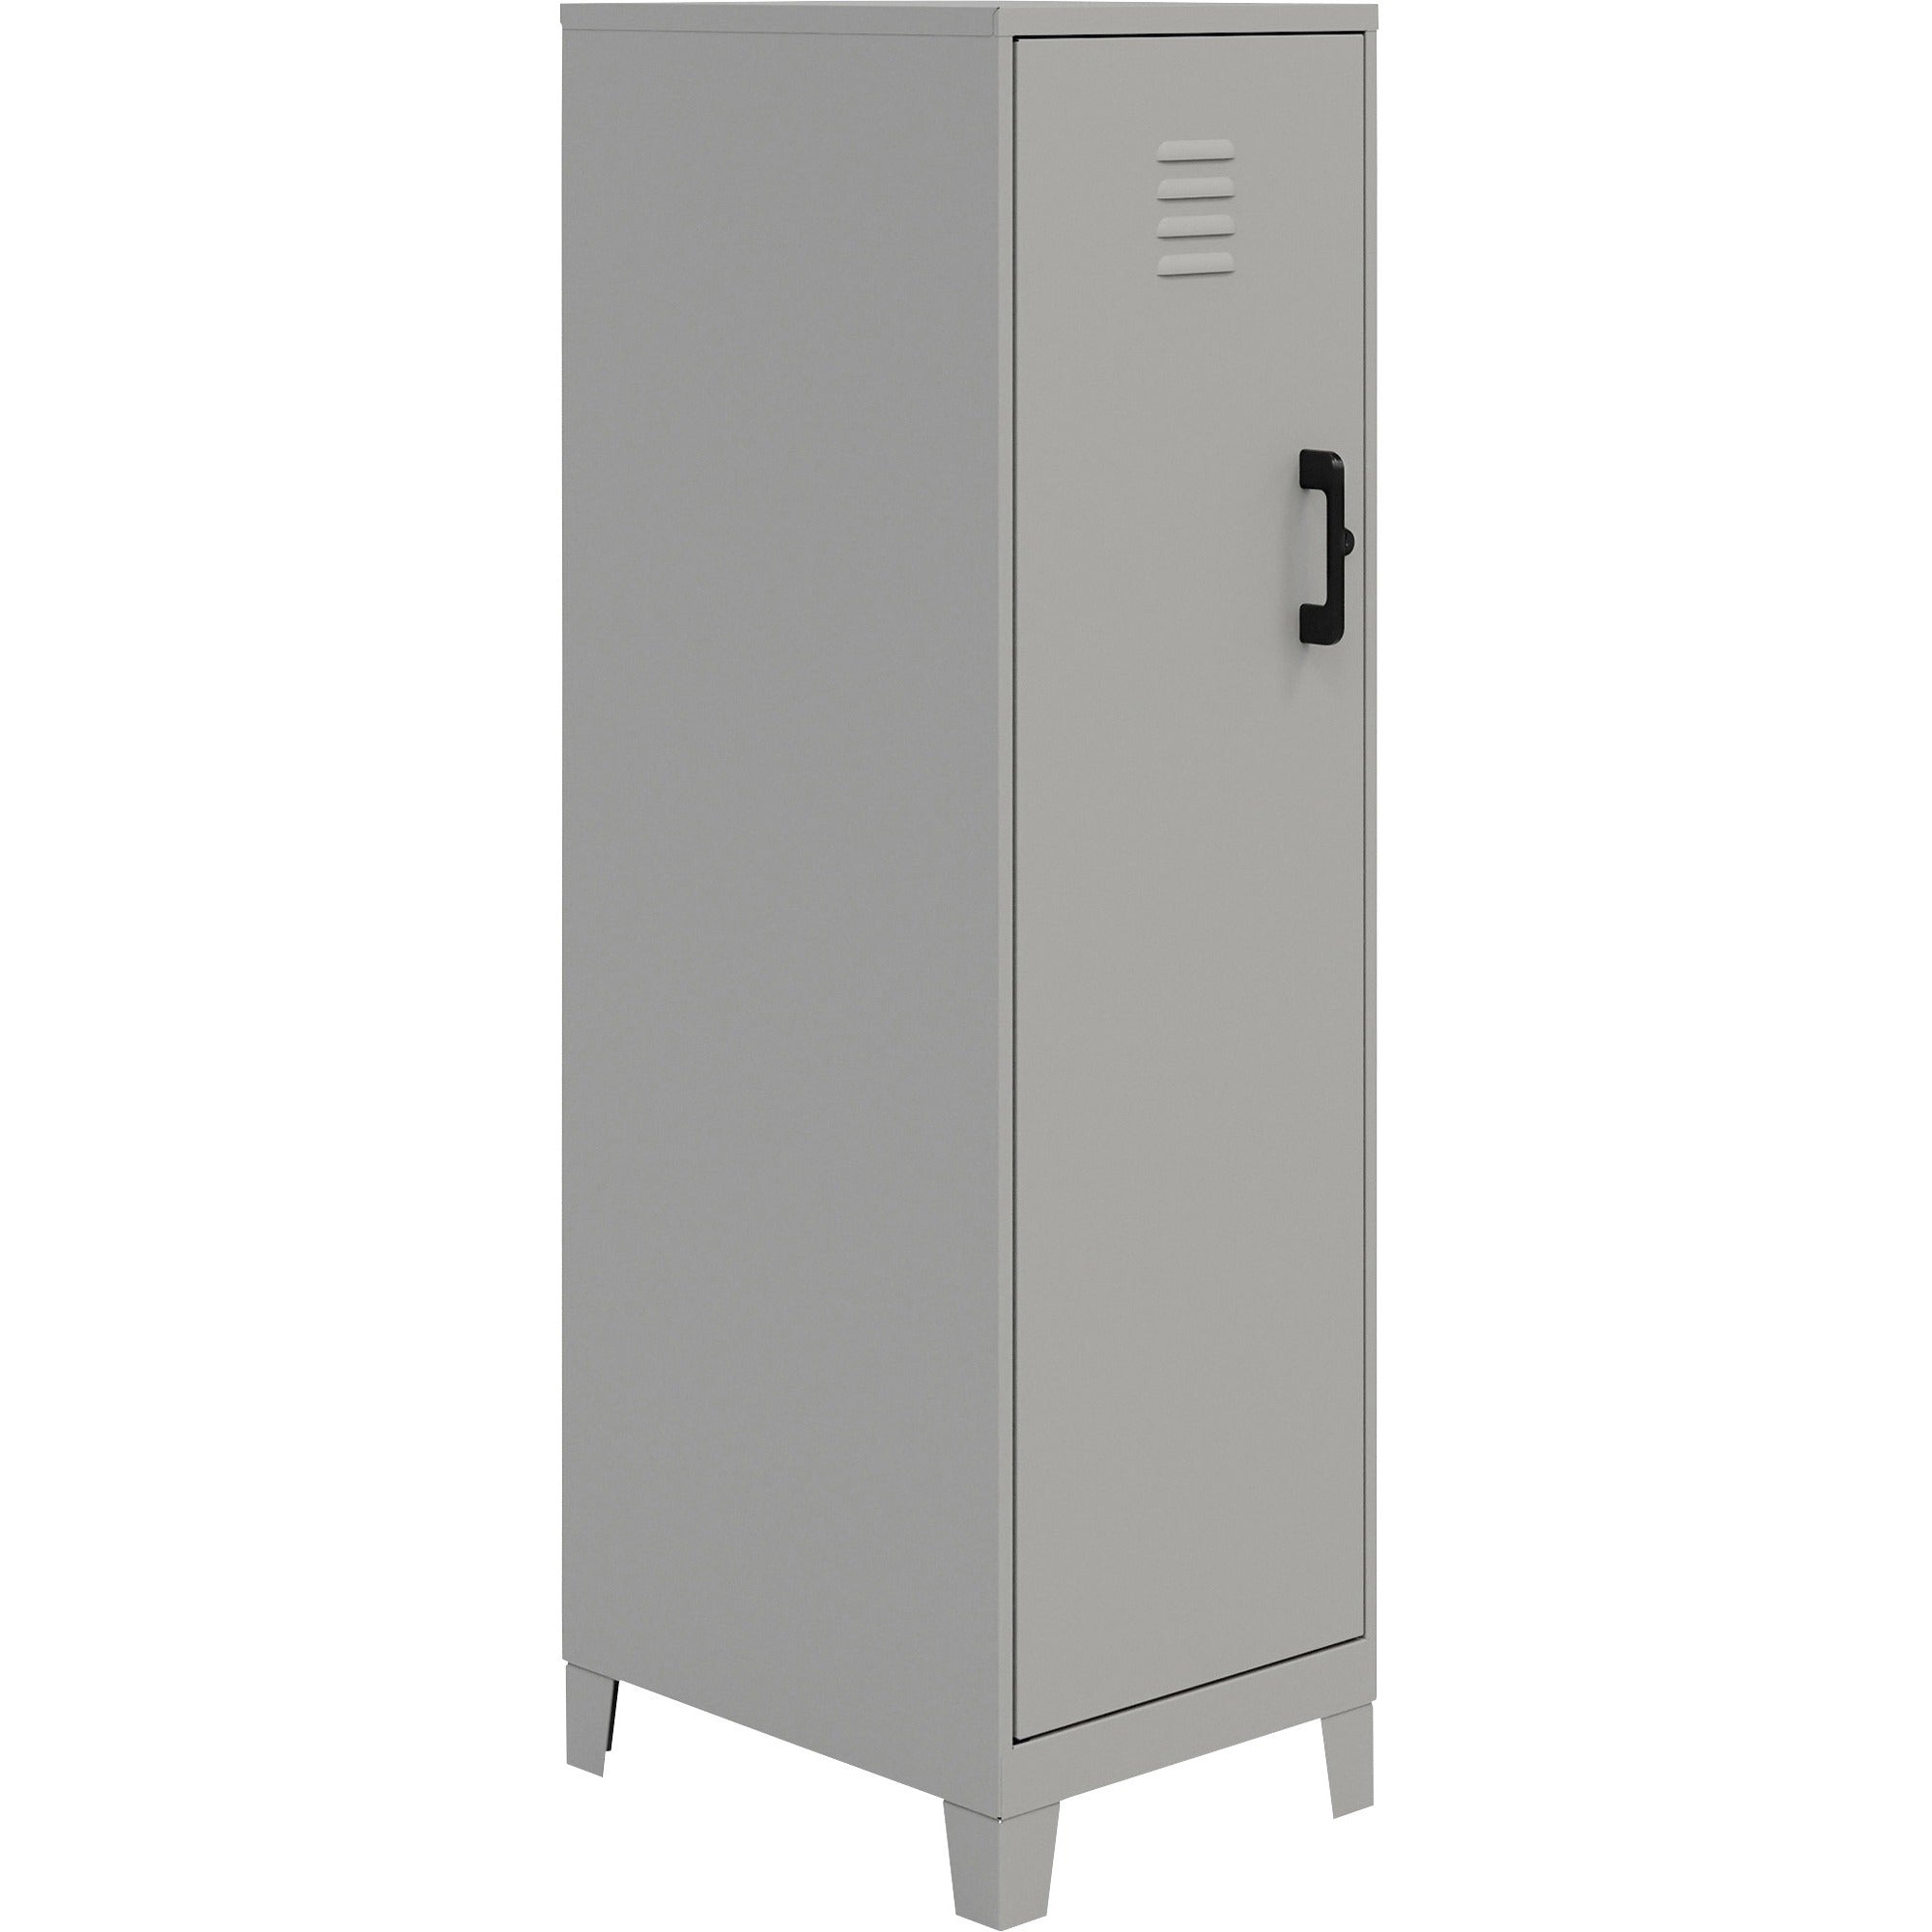 nusparc-personal-locker-4-shelves-for-office-home-sport-equipments-toy-game-classroom-playroom-basement-garage-overall-size-533-x-142-x-18-silver-steel-taa-compliant_nprsl418zzsr - 1